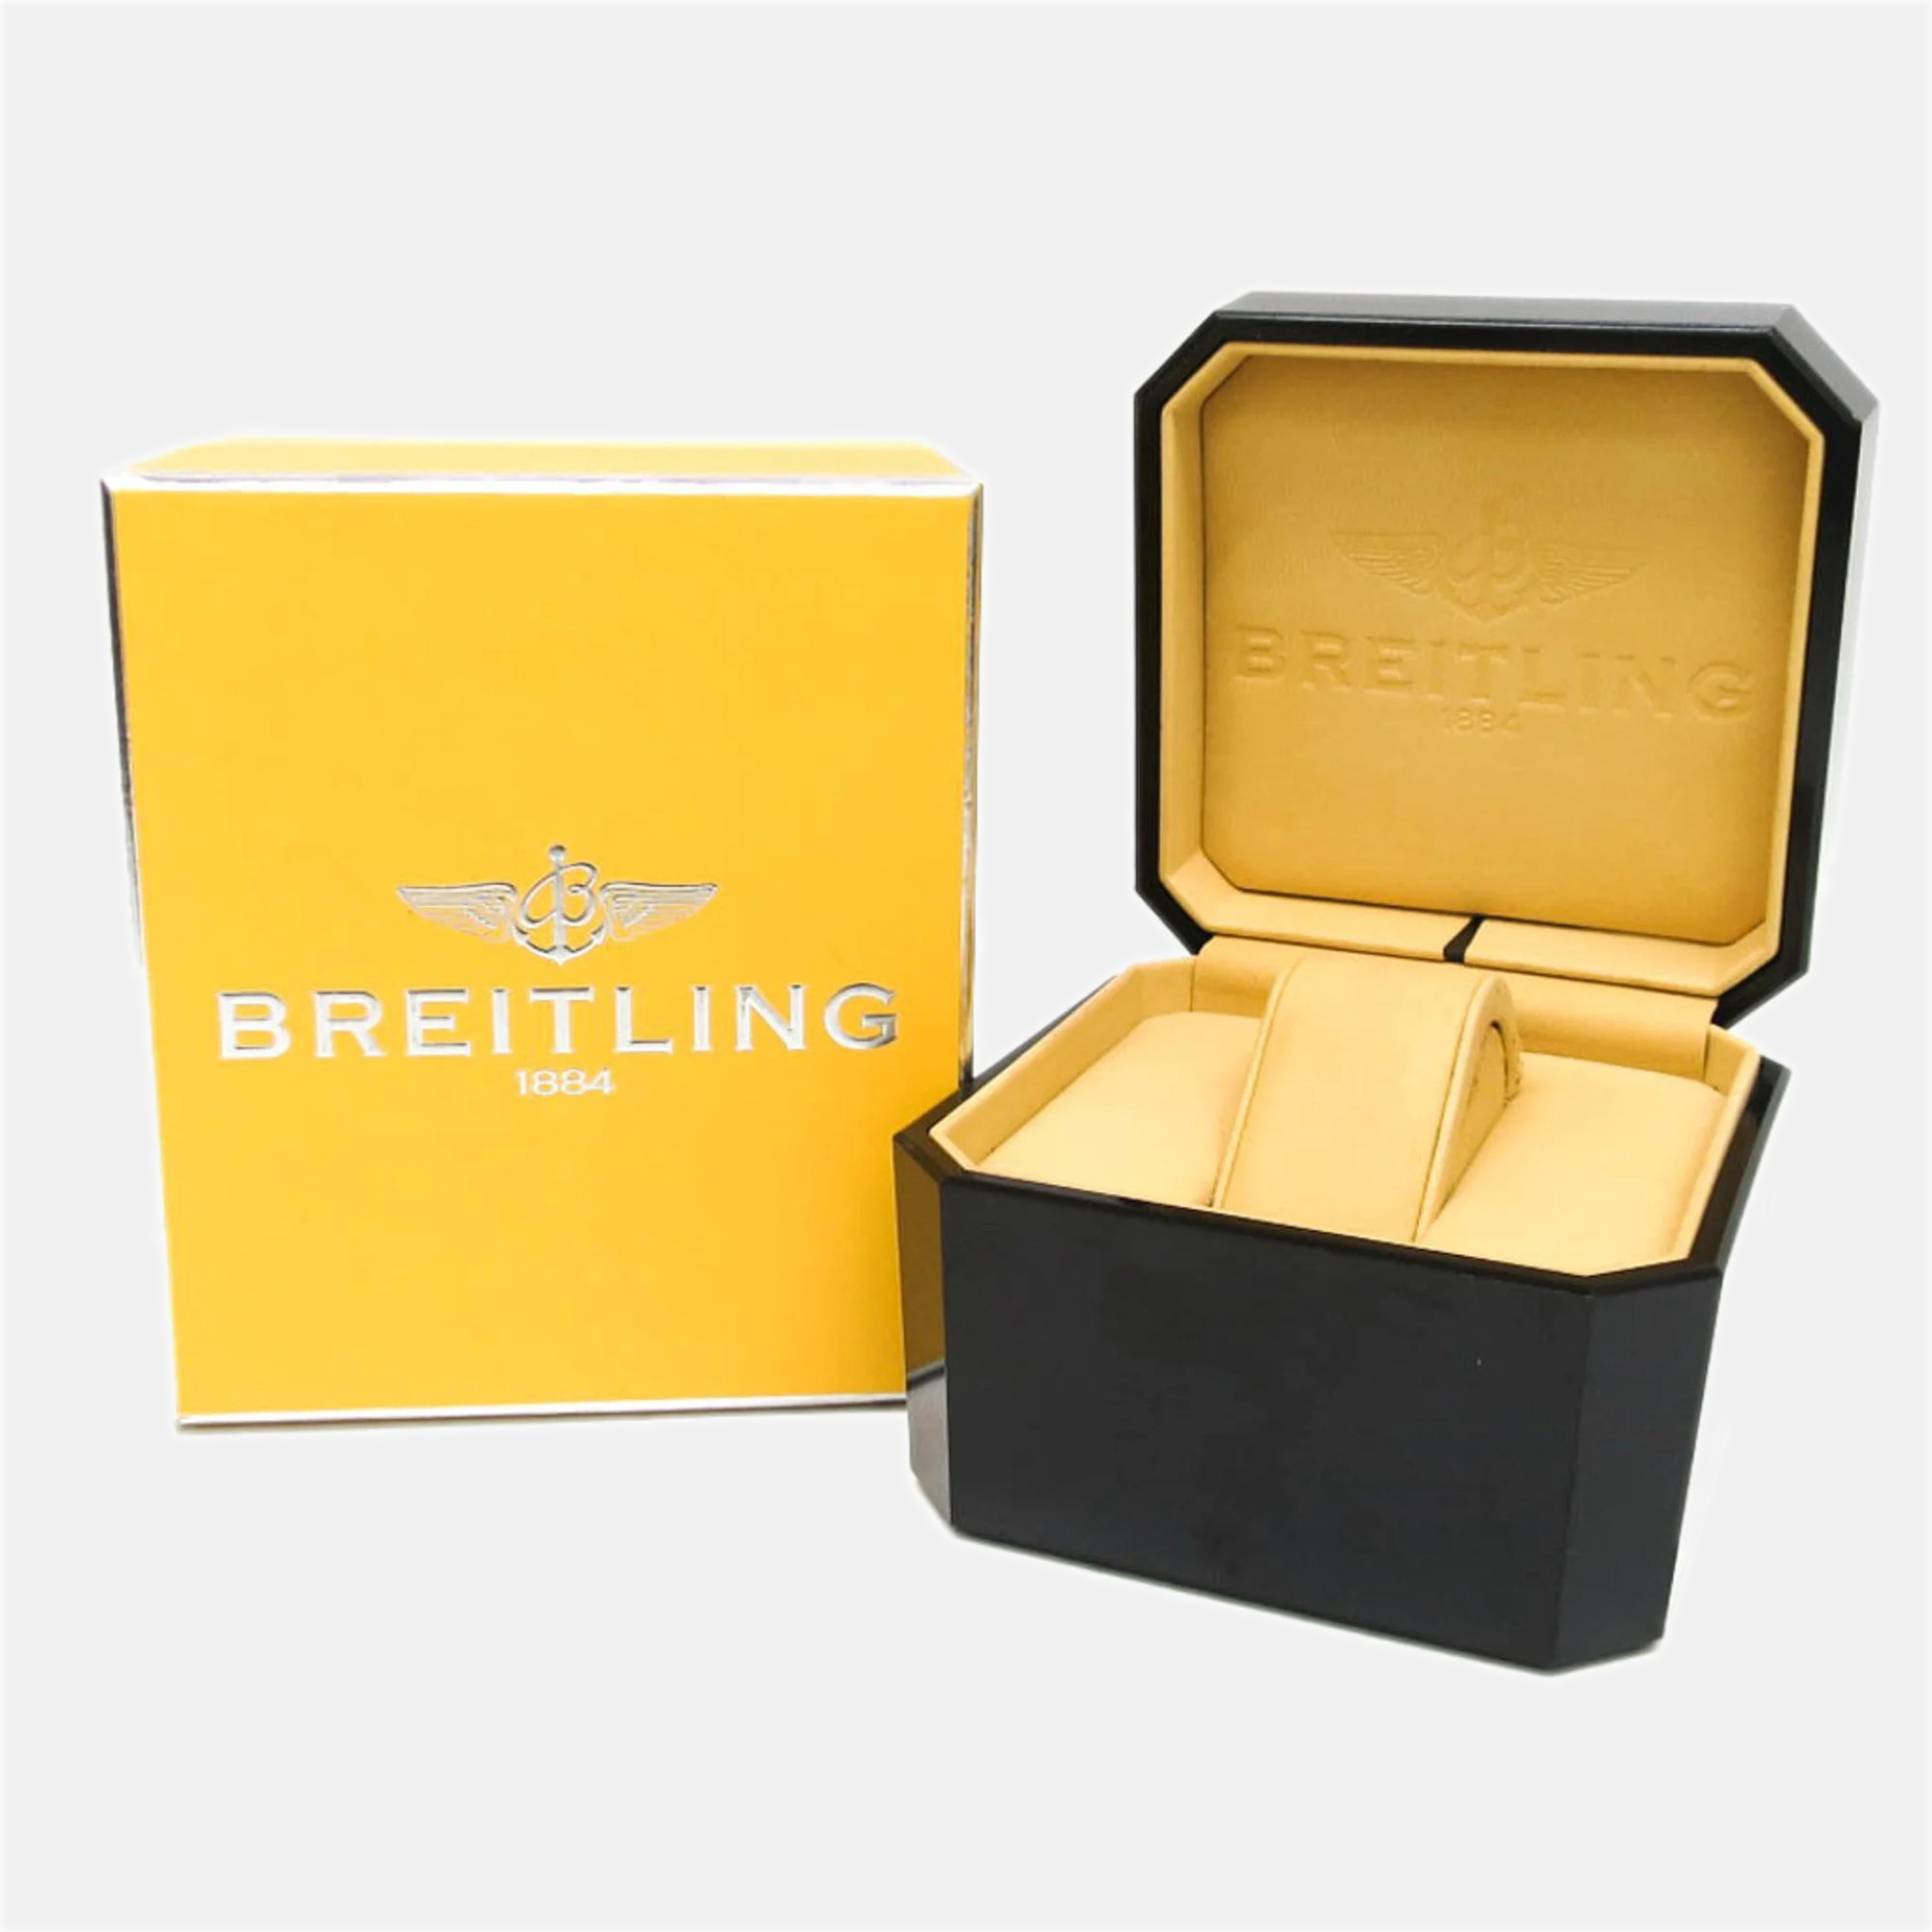 Breitling White Shell 18k Yellow Gold And Stainless Steel Callistino Quartz Women's Wristwatch 27 Mm